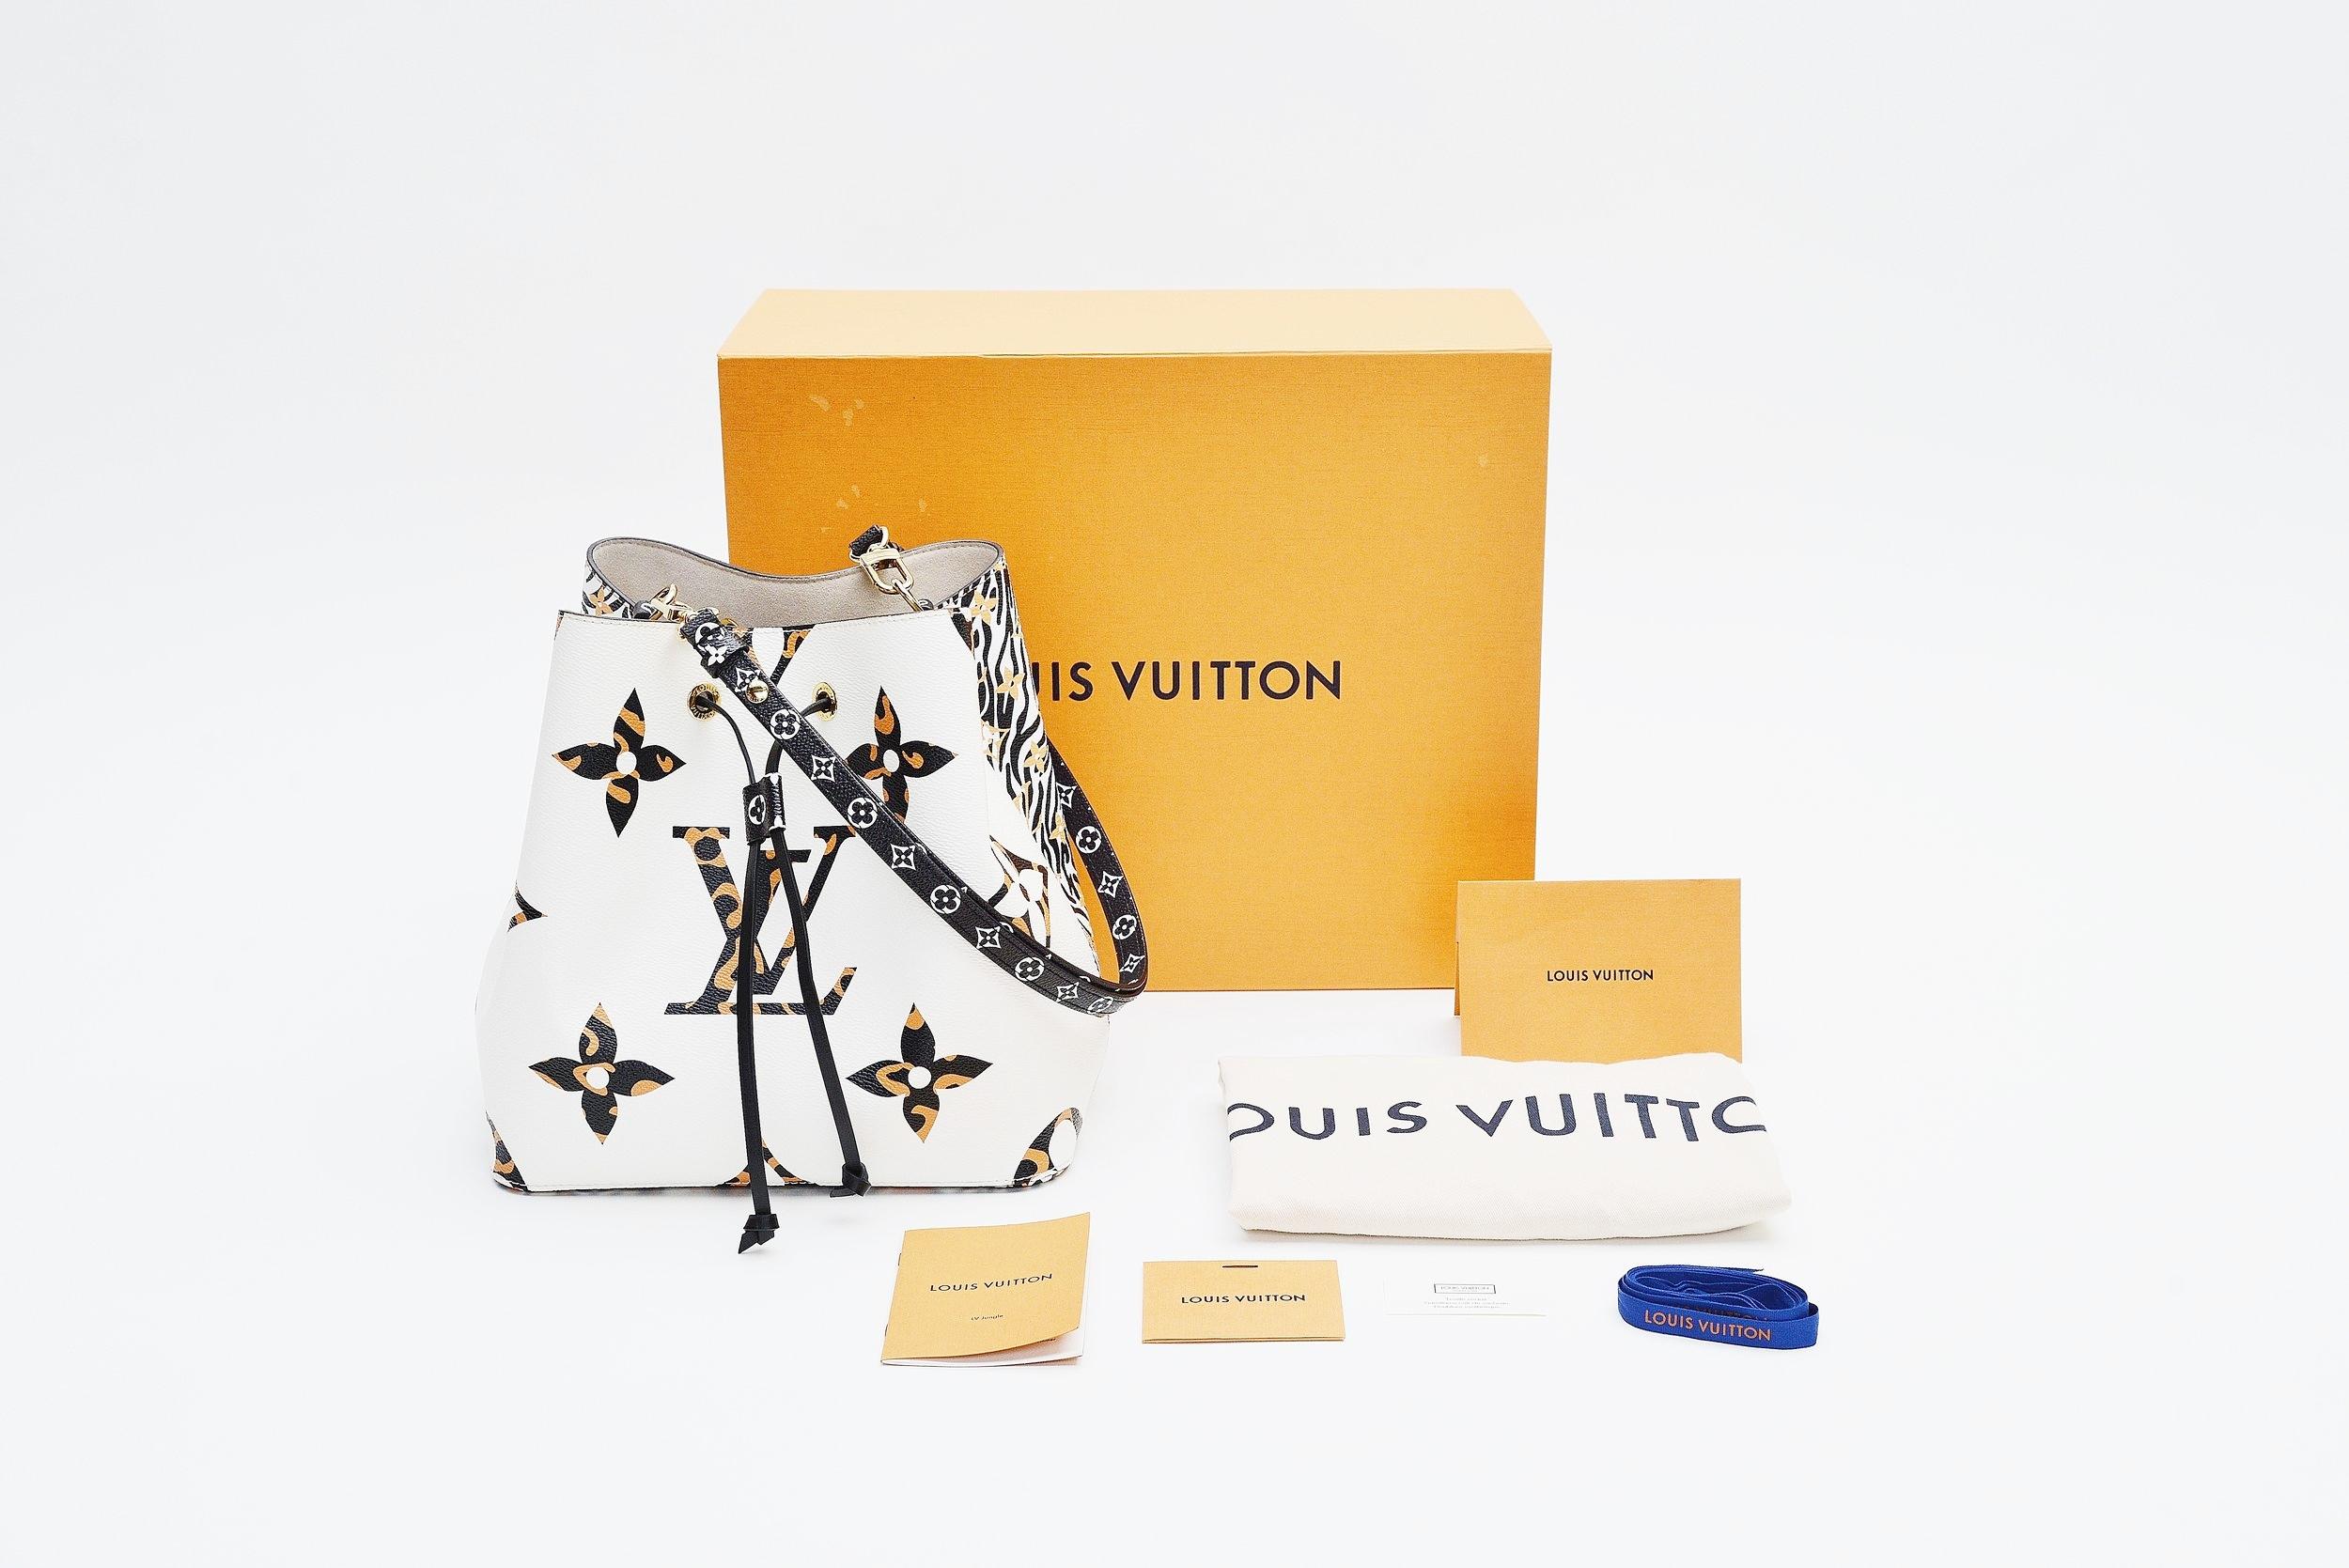 From the collection of Savineti we offer this Louis Vuitton NeoNoe.:
-	Brand: Louis Vuitton
-	Model: NeoNoe
-	Year: 2019 (Autumn Jungle Collection) 
-	Code: SP3119
-	Condition: excellent (as new), just 2 small pen dots on the inside of the bag (see